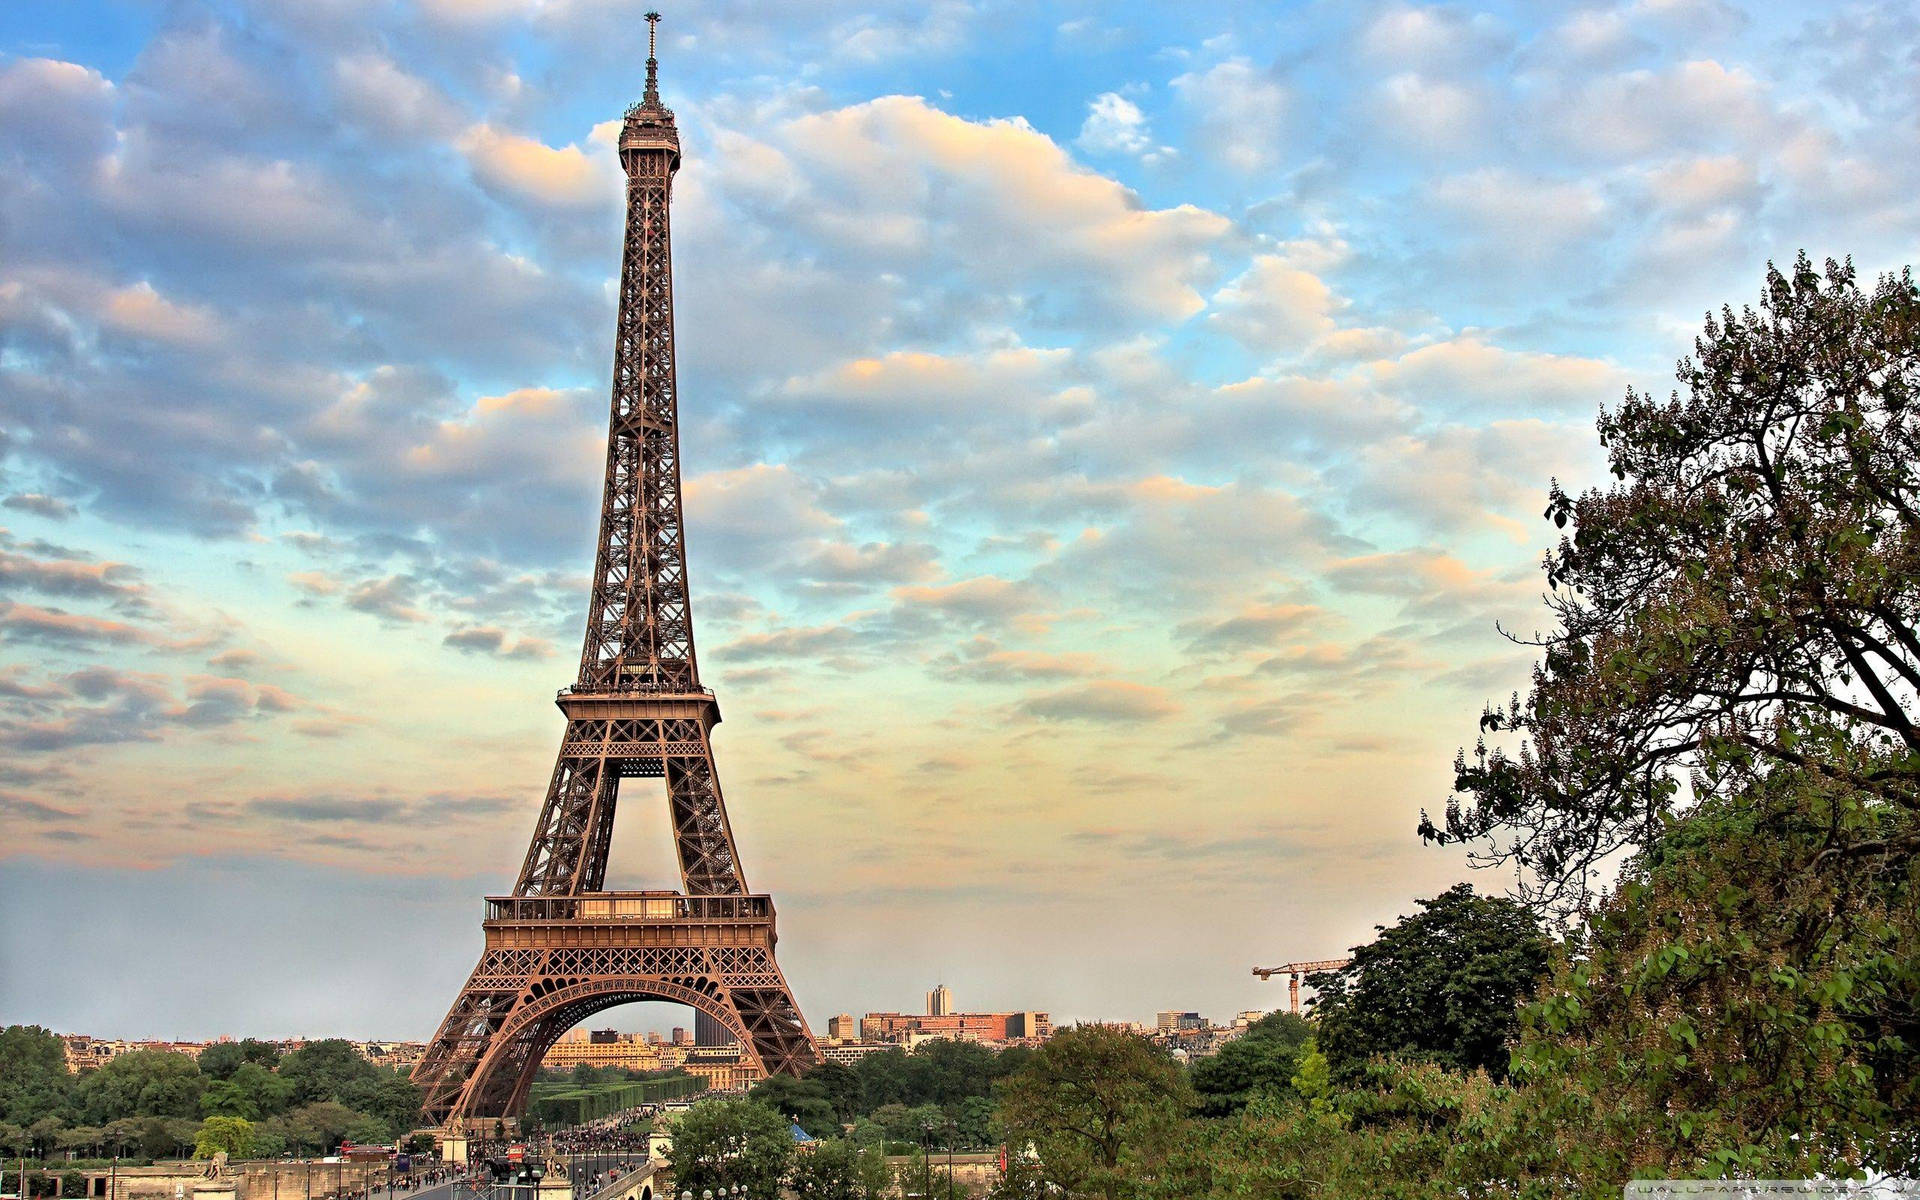 Get lost in the beauty of the Eiffel Tower in Paris Wallpaper